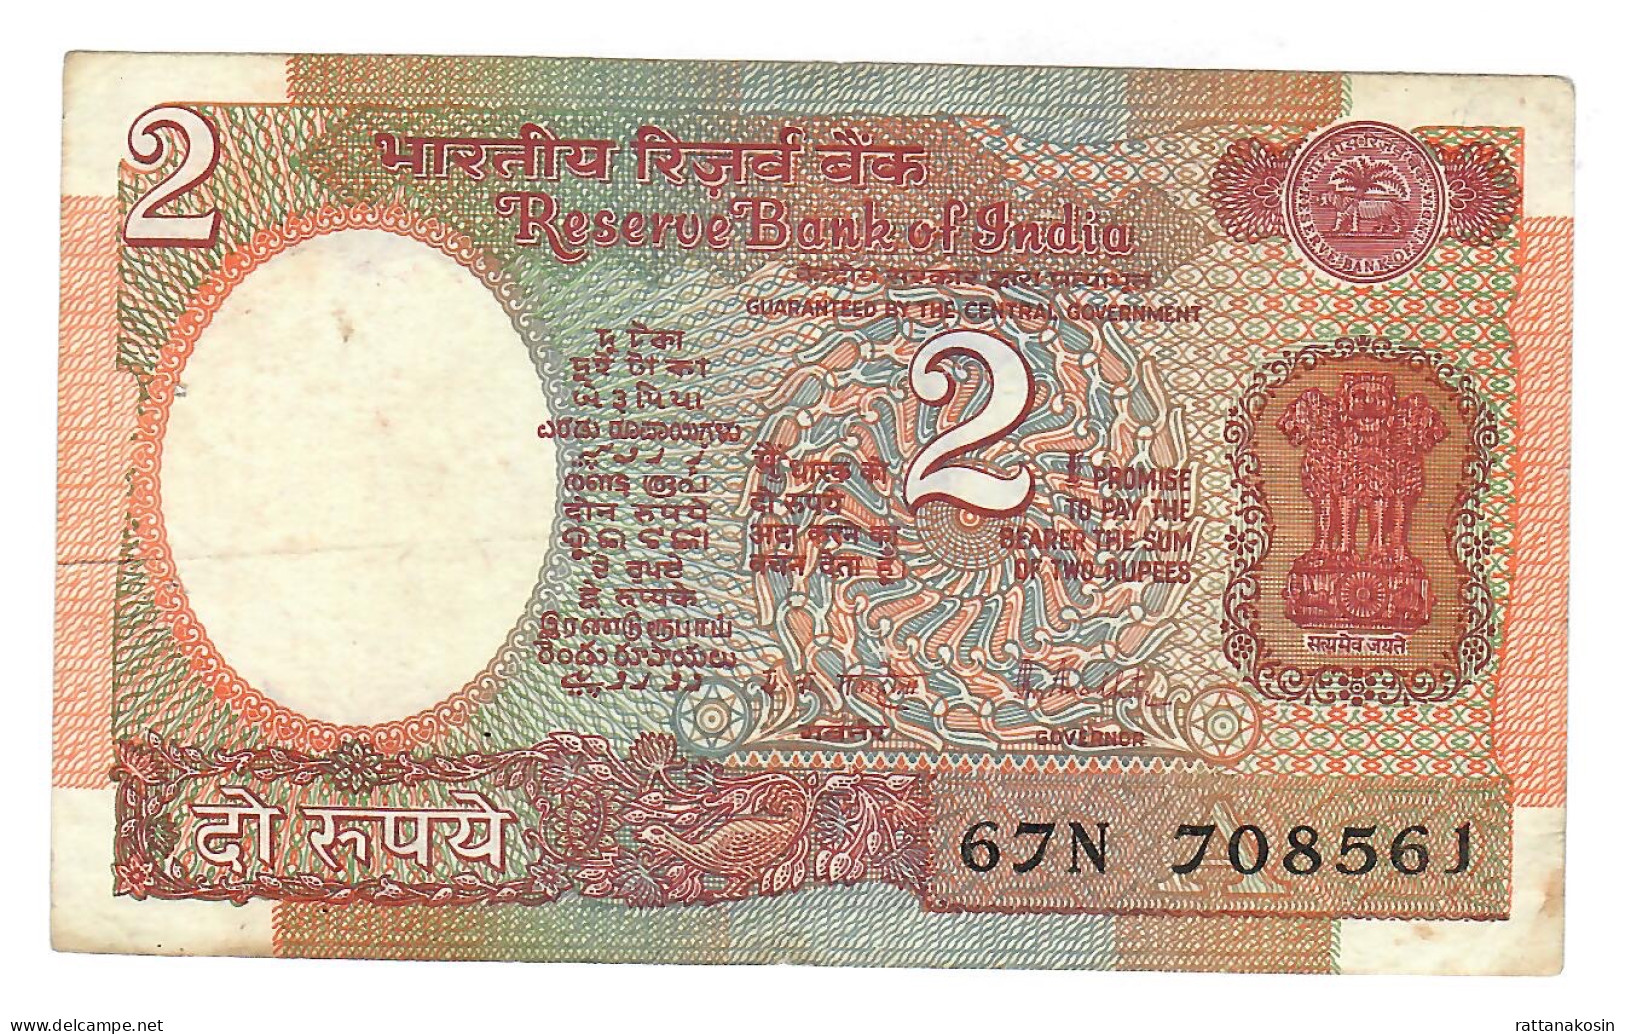 INDIA P79a2 2 RUPEES 1985-1990 Signature 15 LETTER A   VF - Inde